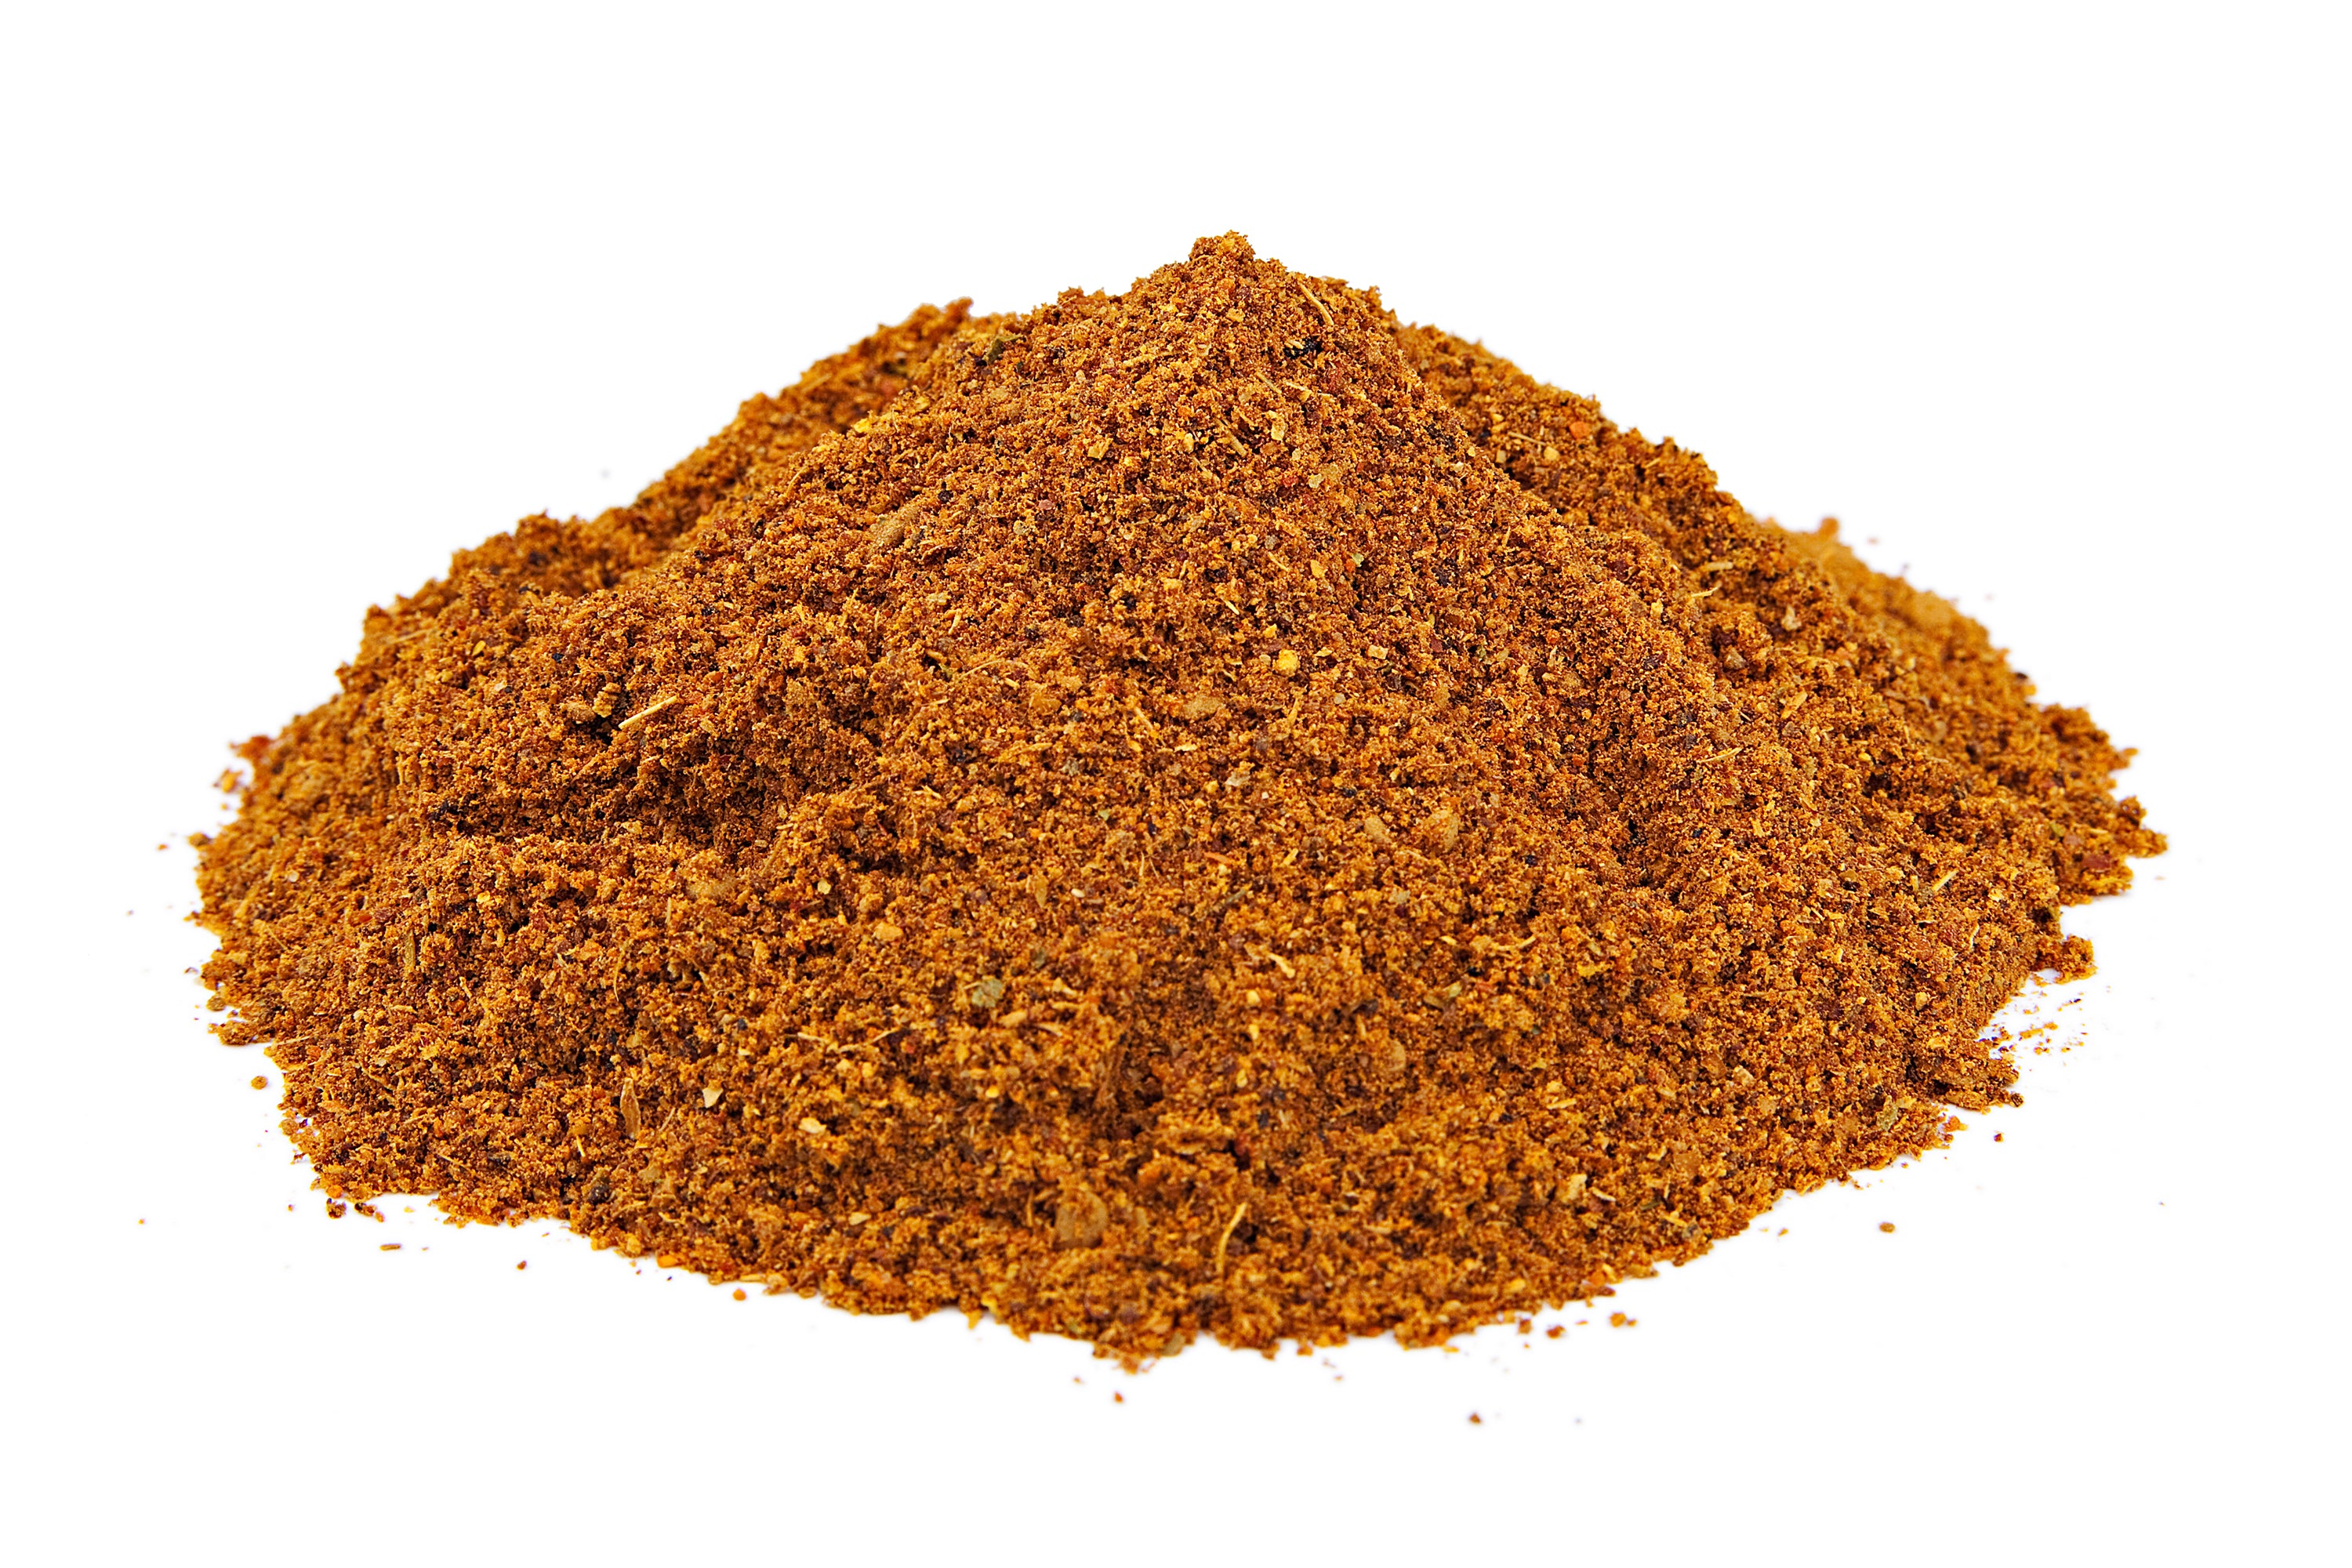 Karl's Moroccan Spice Mix II (another Ras el Hanout)